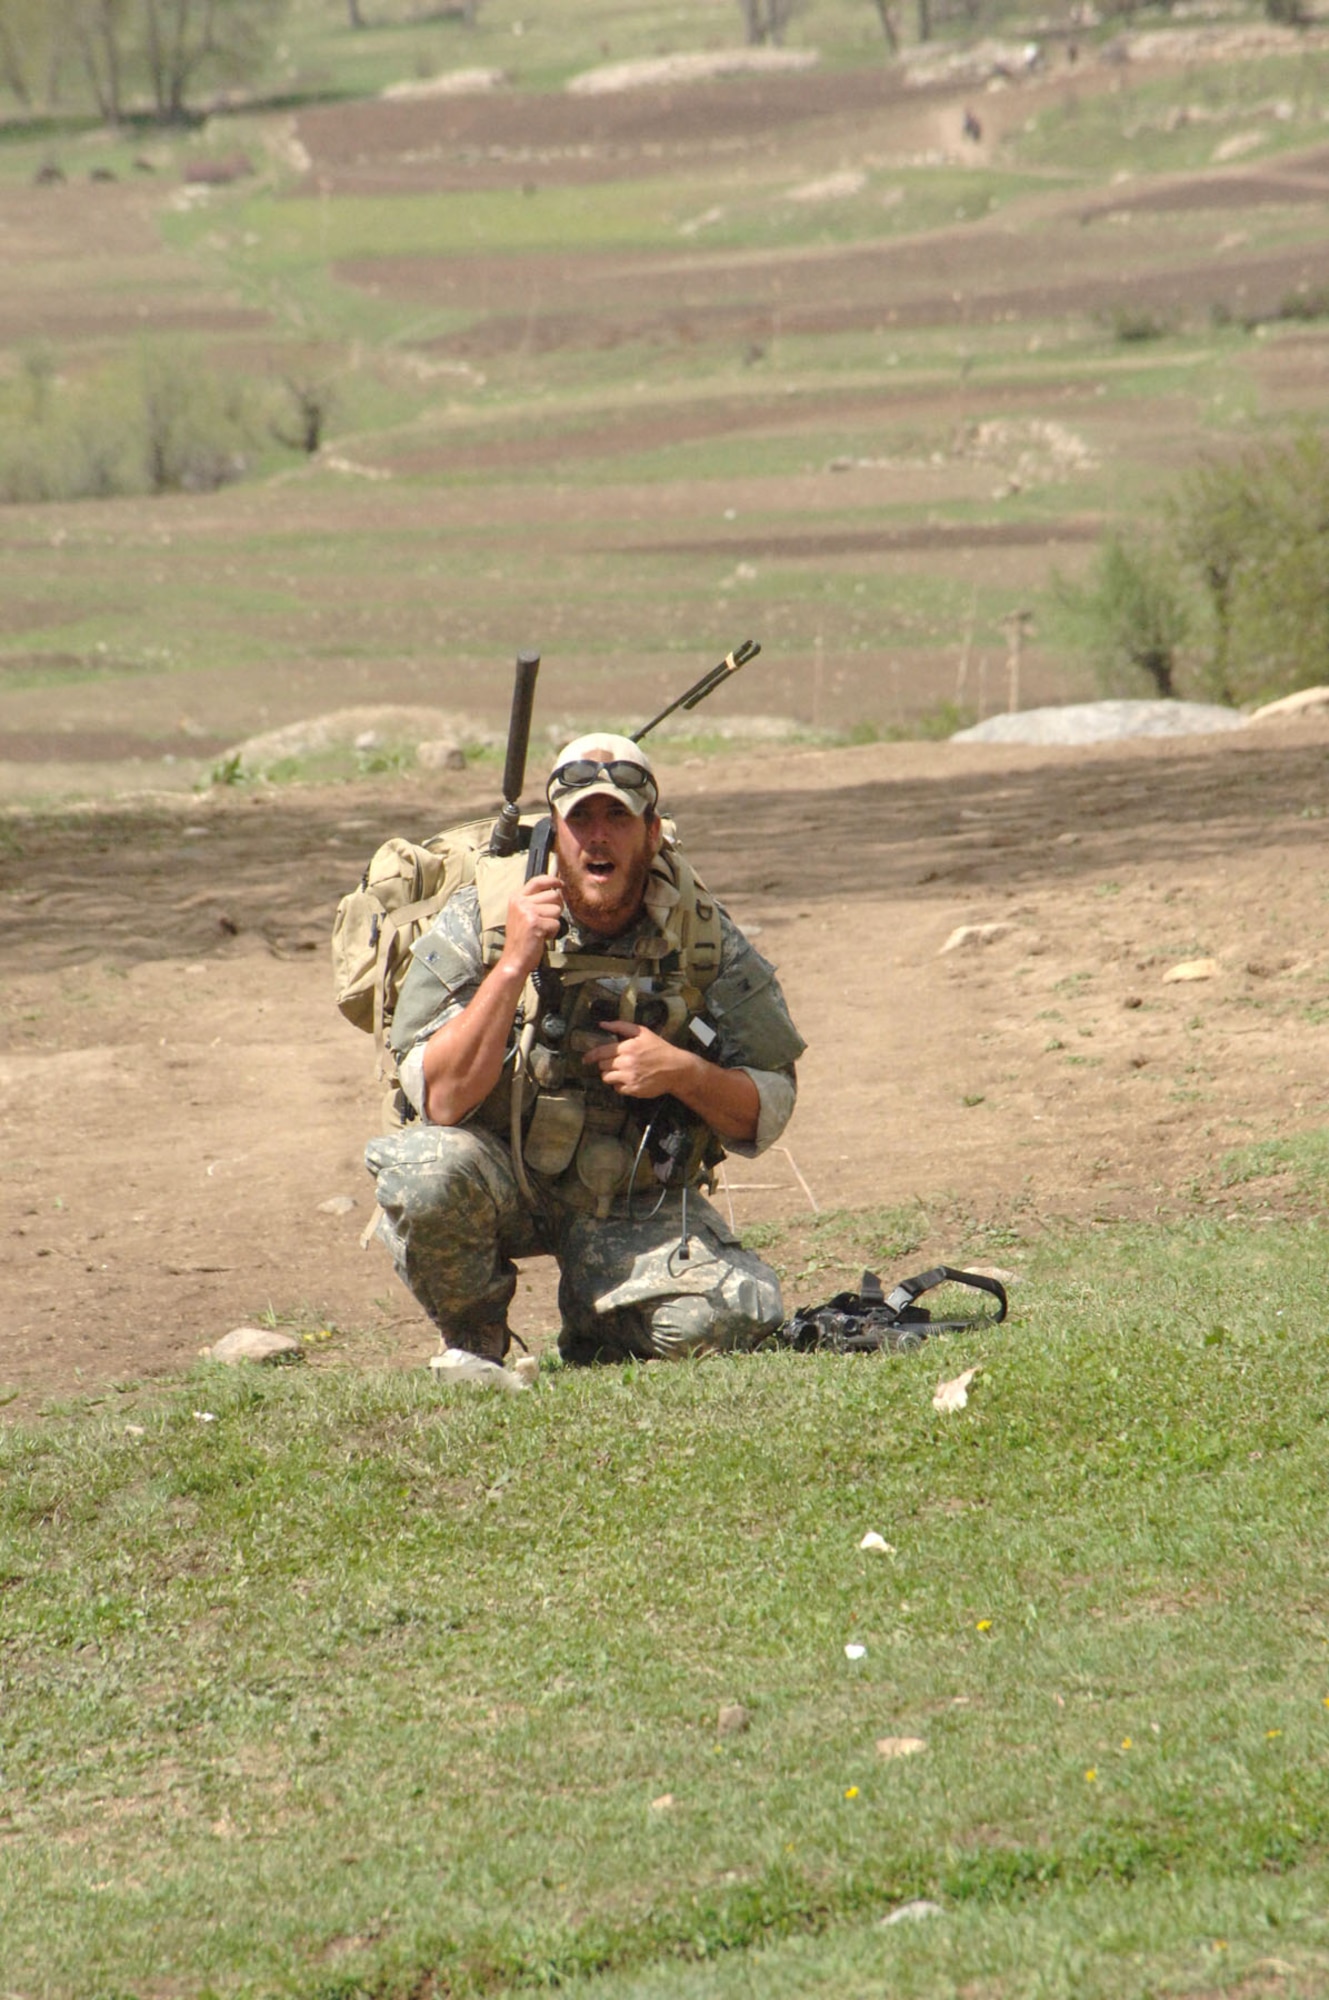 Air Force Joint Terminal Attack Controller (JTAC) talking on the radio in support of a U.S. Army Special Forces team in Afghanistan. (U.S. Air Force photo)